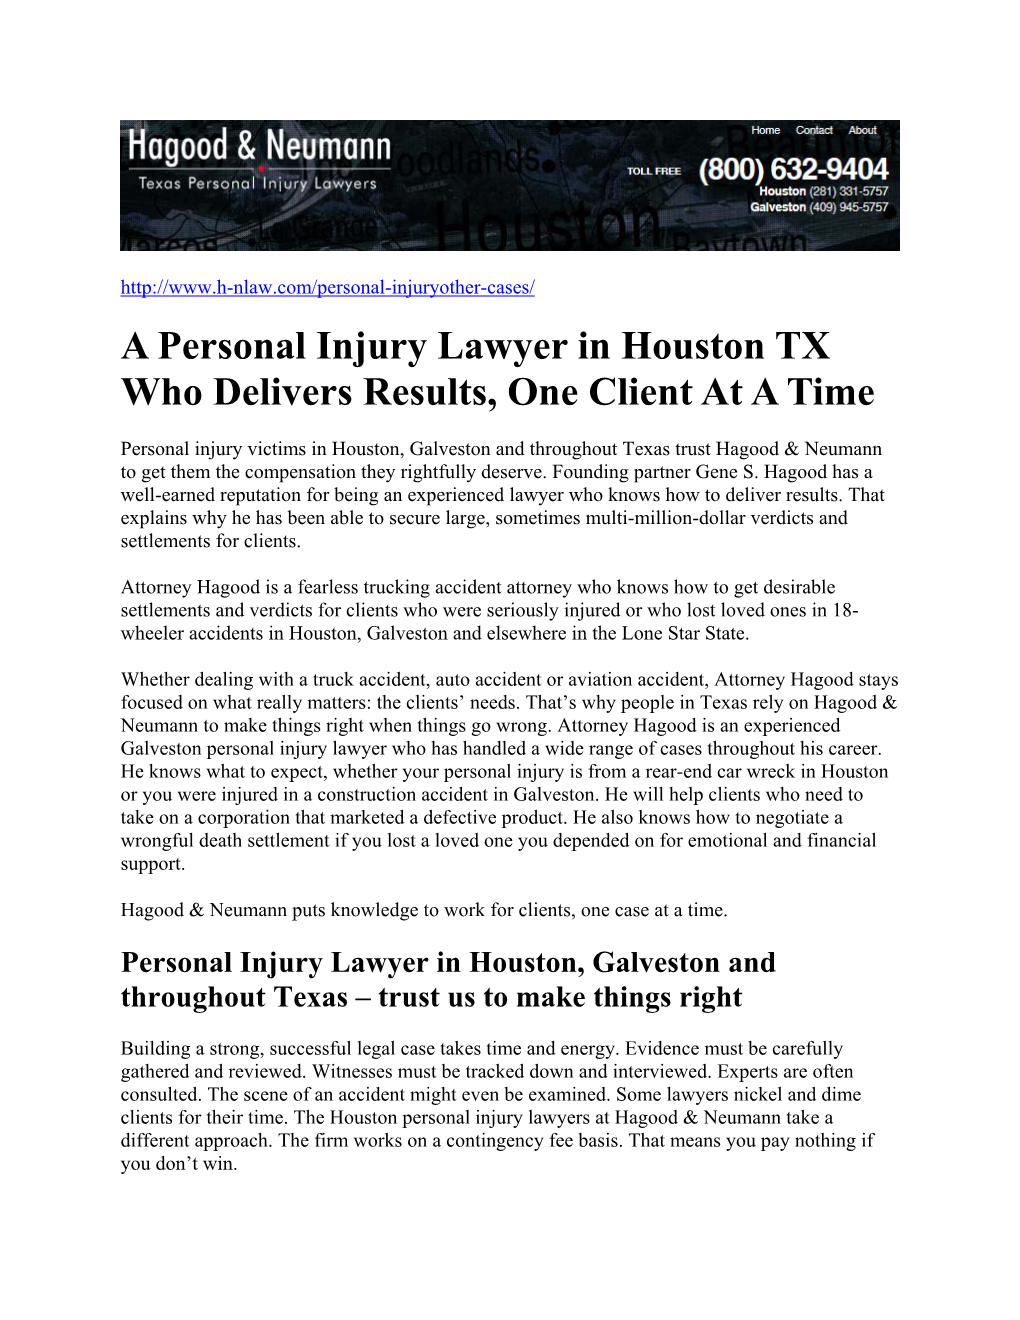 A Personal Injury Lawyer in Houston TX Who Delivers Results, One Client at a Time